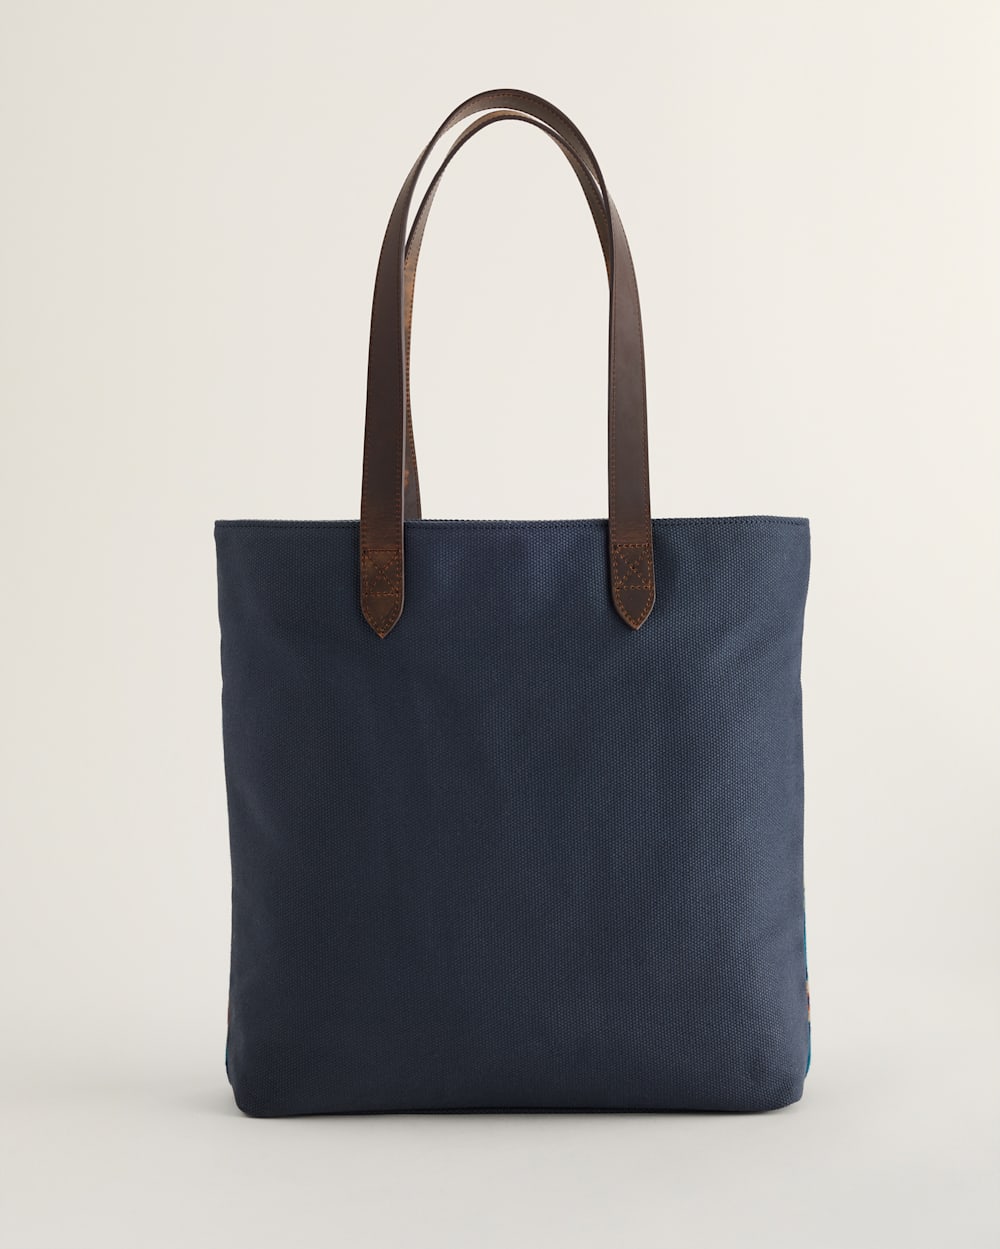 ALTERNATE VIEW OF DIAMOND DESERT WOOL/LEATHER MARKET TOTE IN BLUE MULTI image number 3